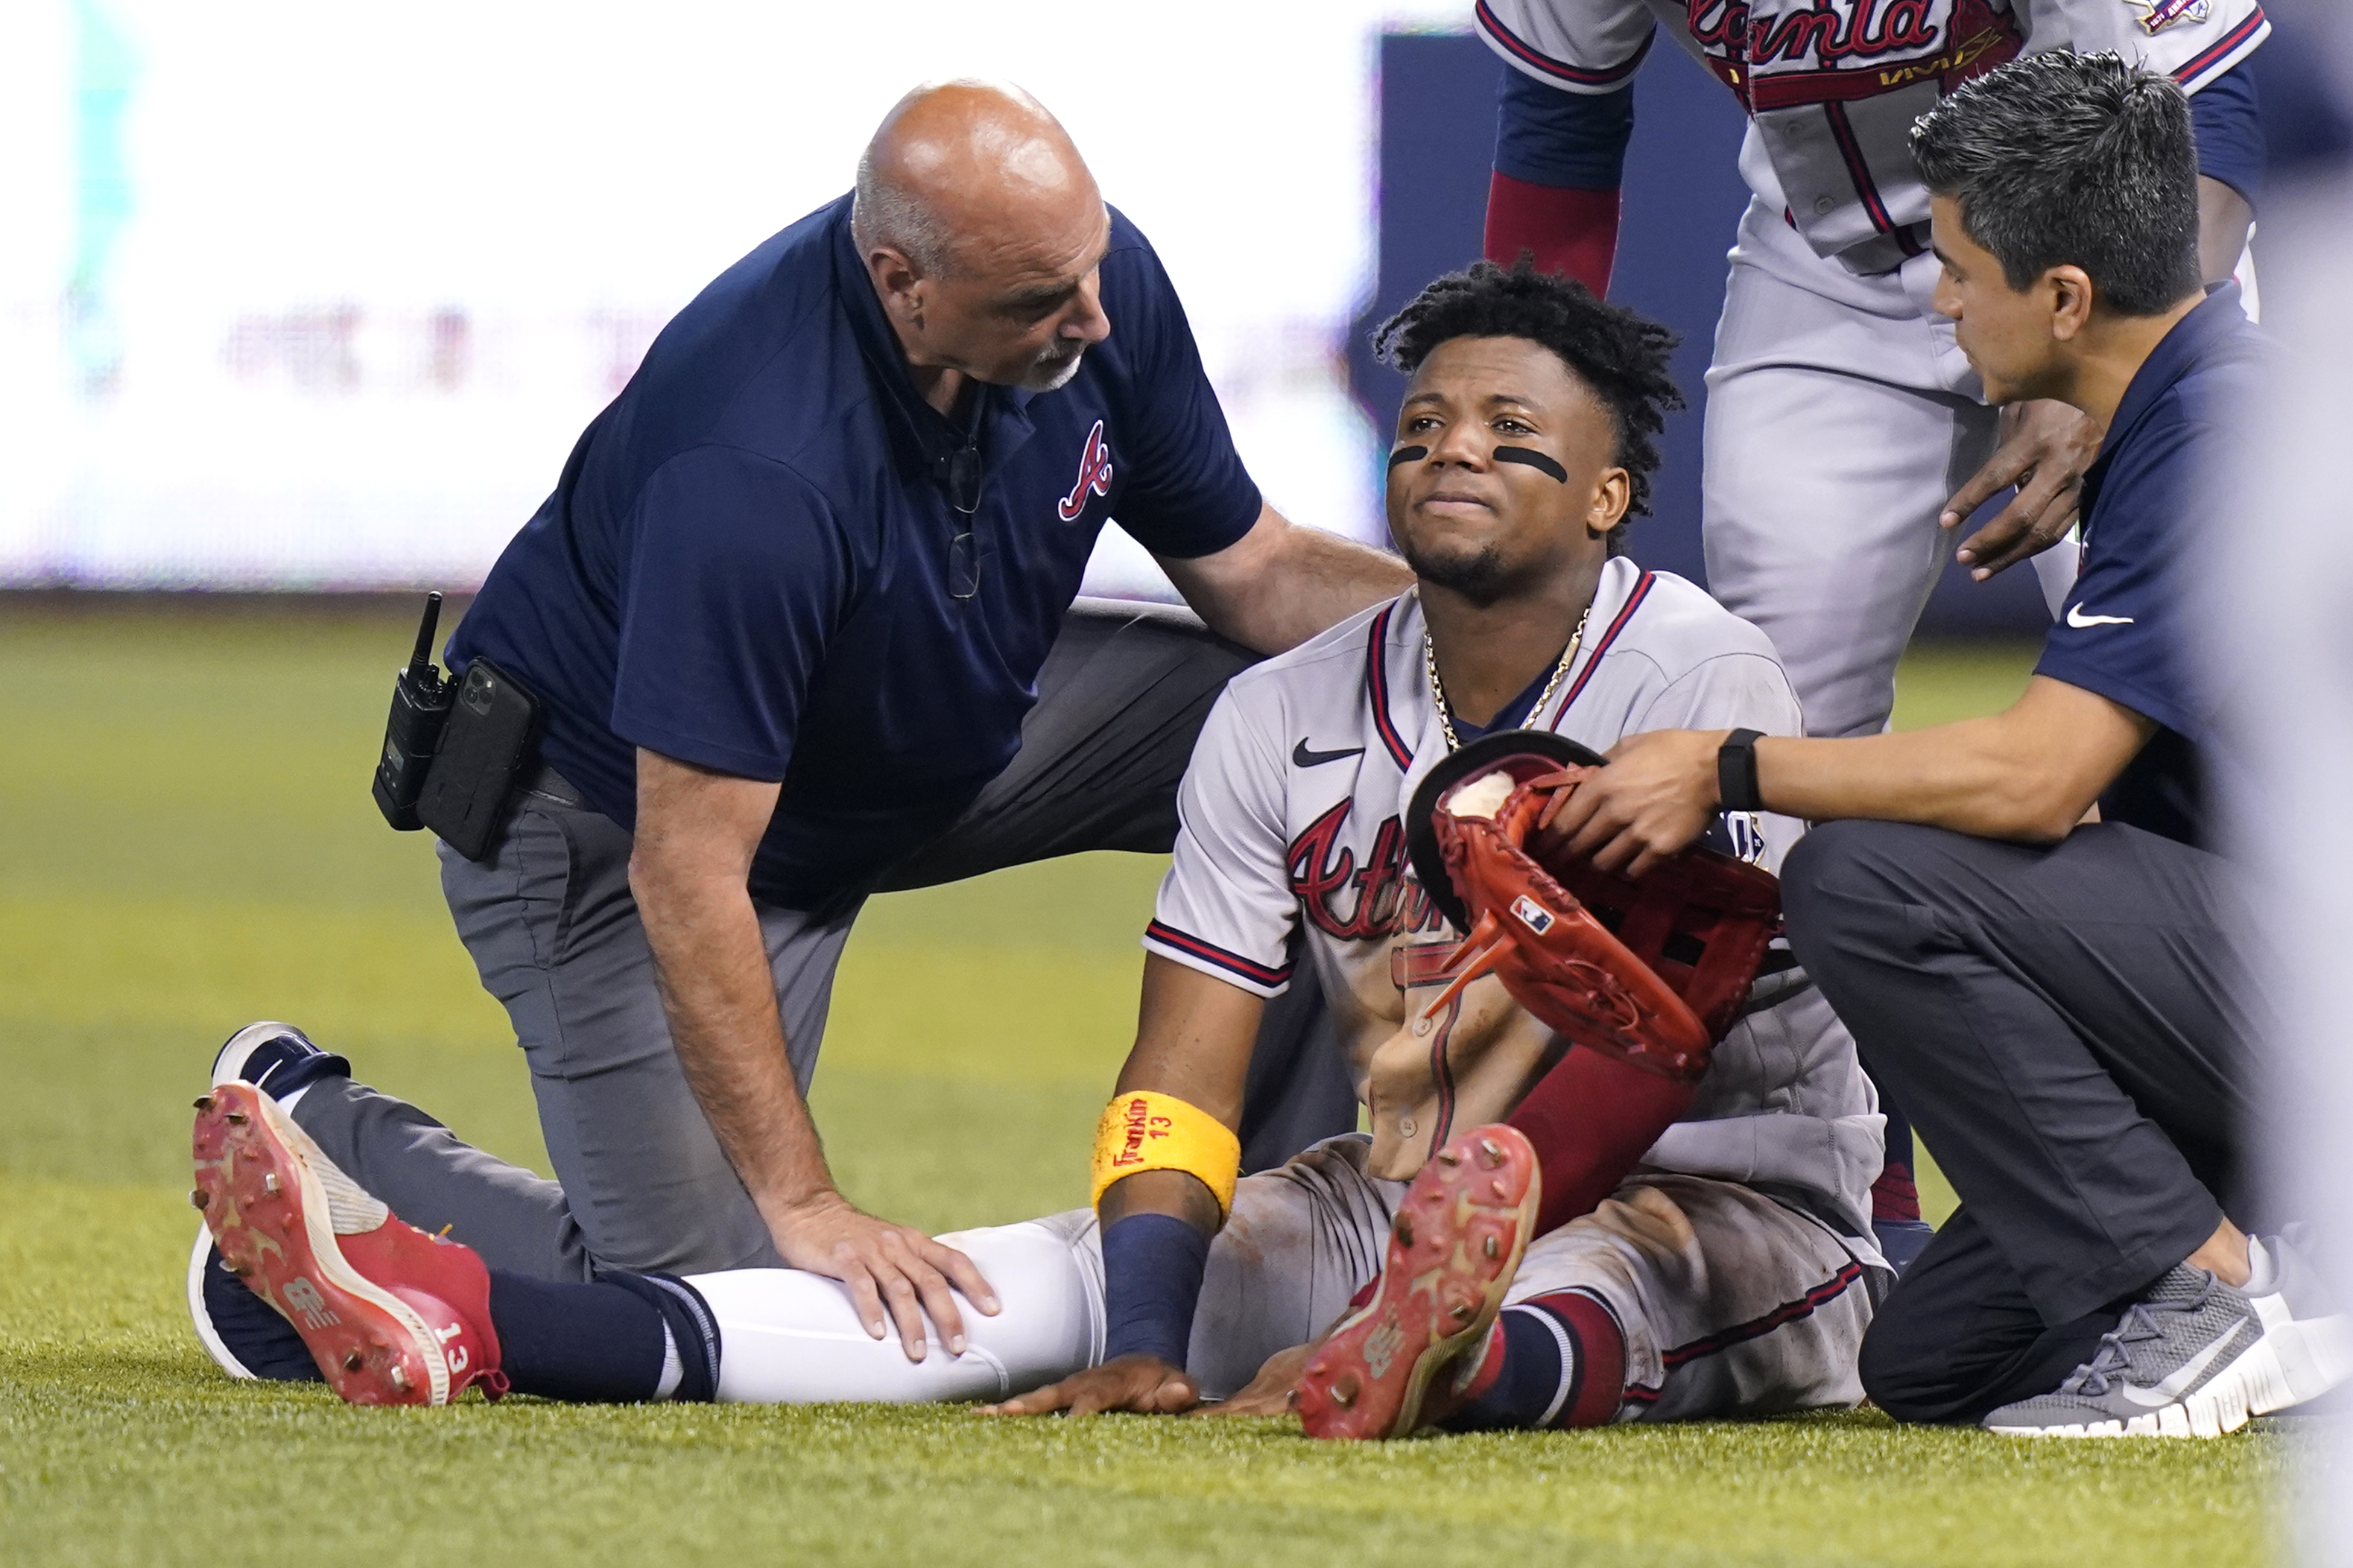 Braves can make postseason run without Ronald Acuna